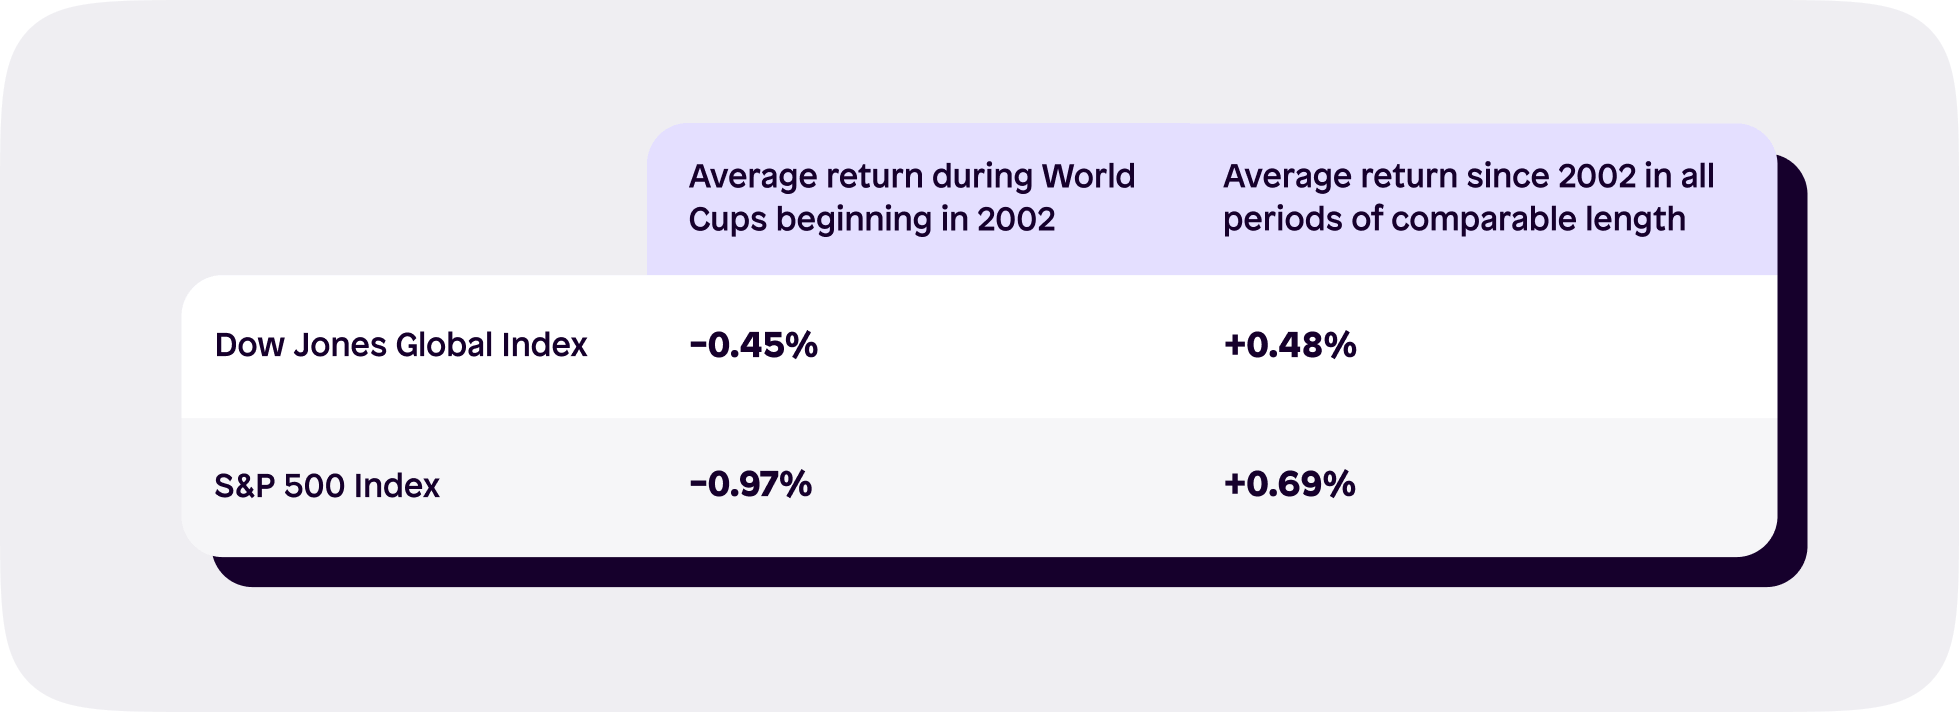 Dow Jones and S&P 500 performance during World Cups